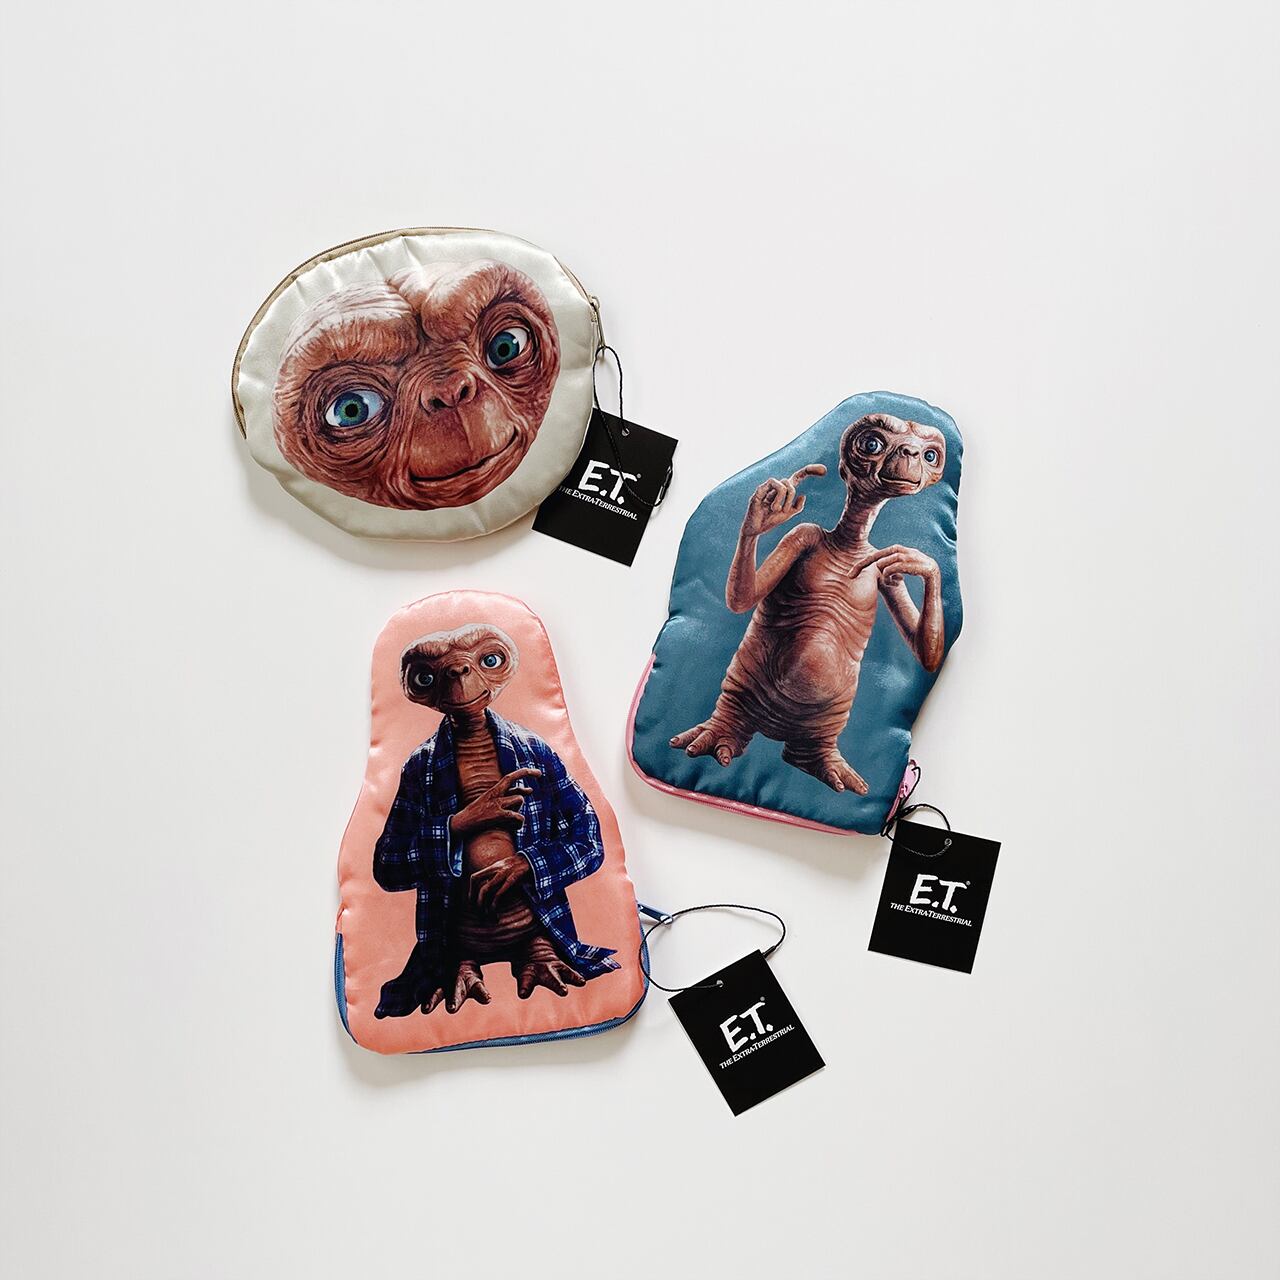 E.T. satin pouch “I'll be right here”